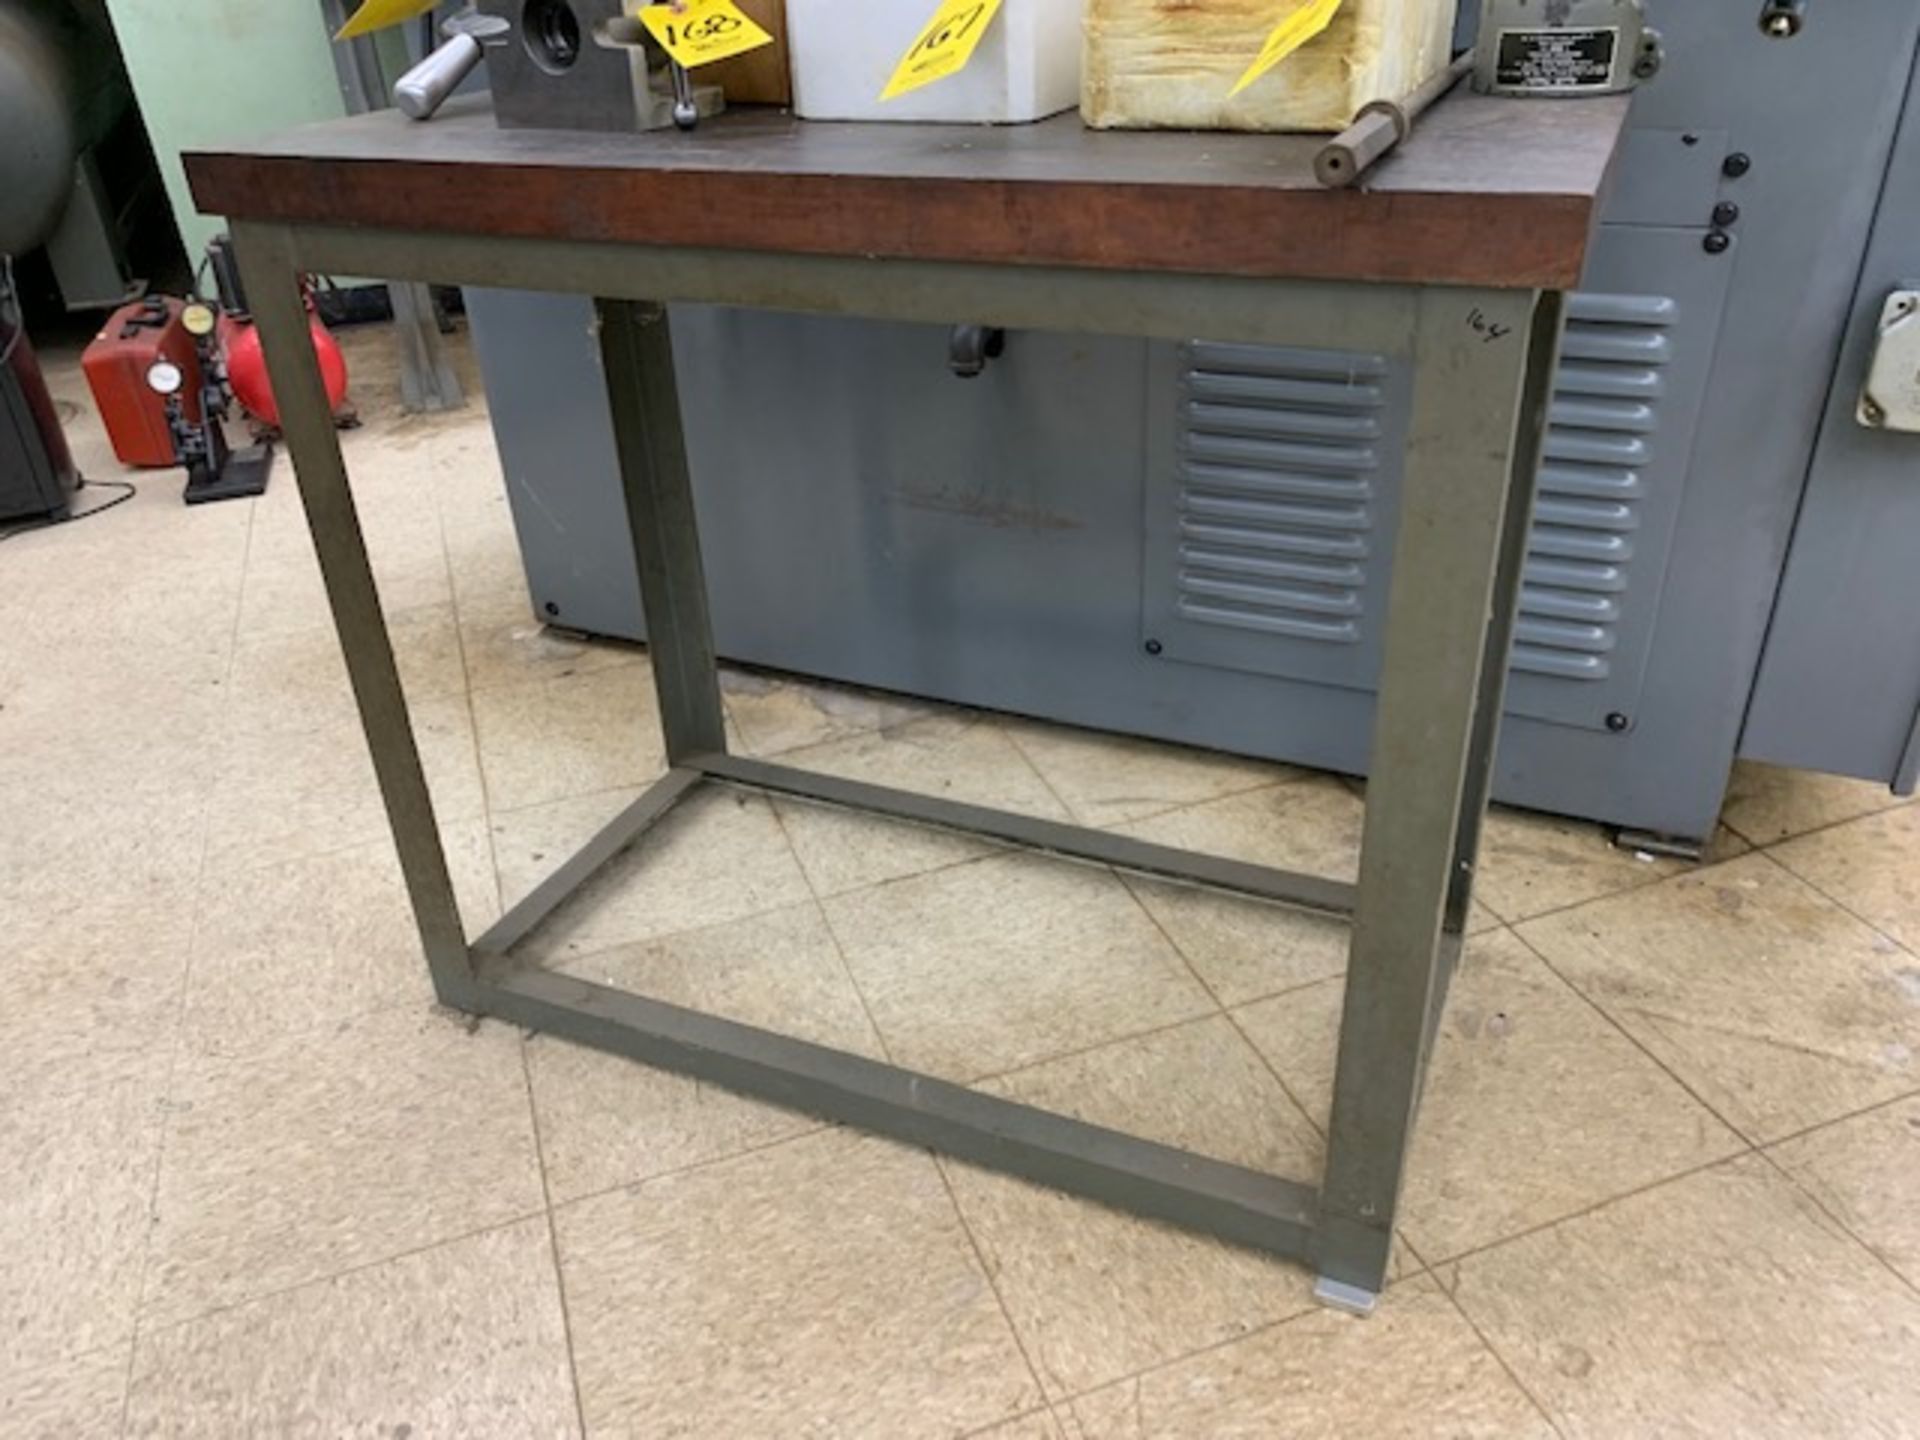 21 X 48 IN. AND 18 X 26 IN. WORK BENCHES - Image 2 of 2